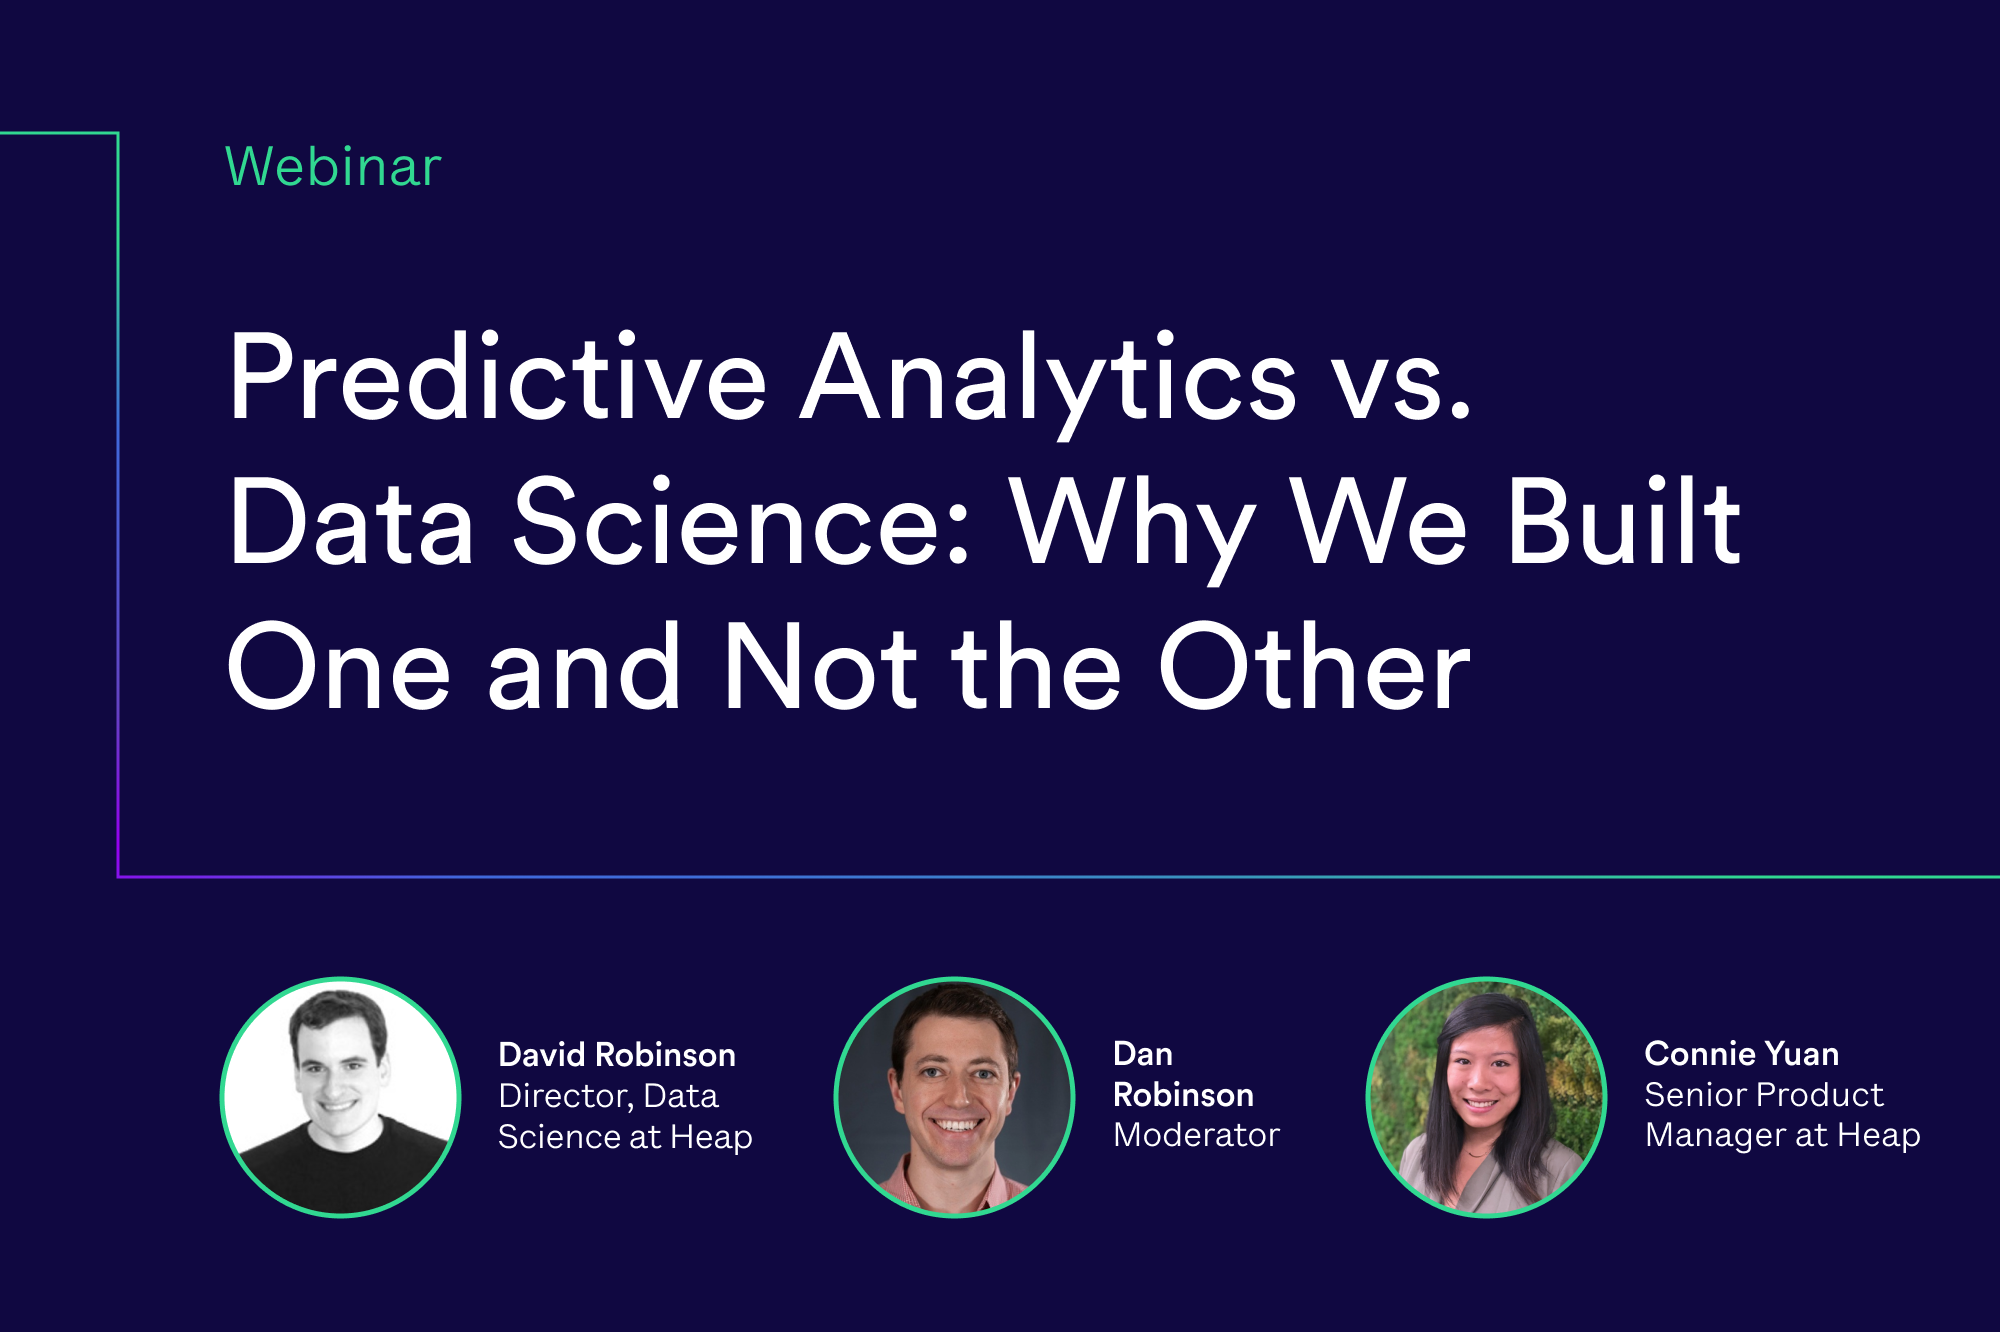 Predictive Analytics vs Data Science: Why we built on and not the other 